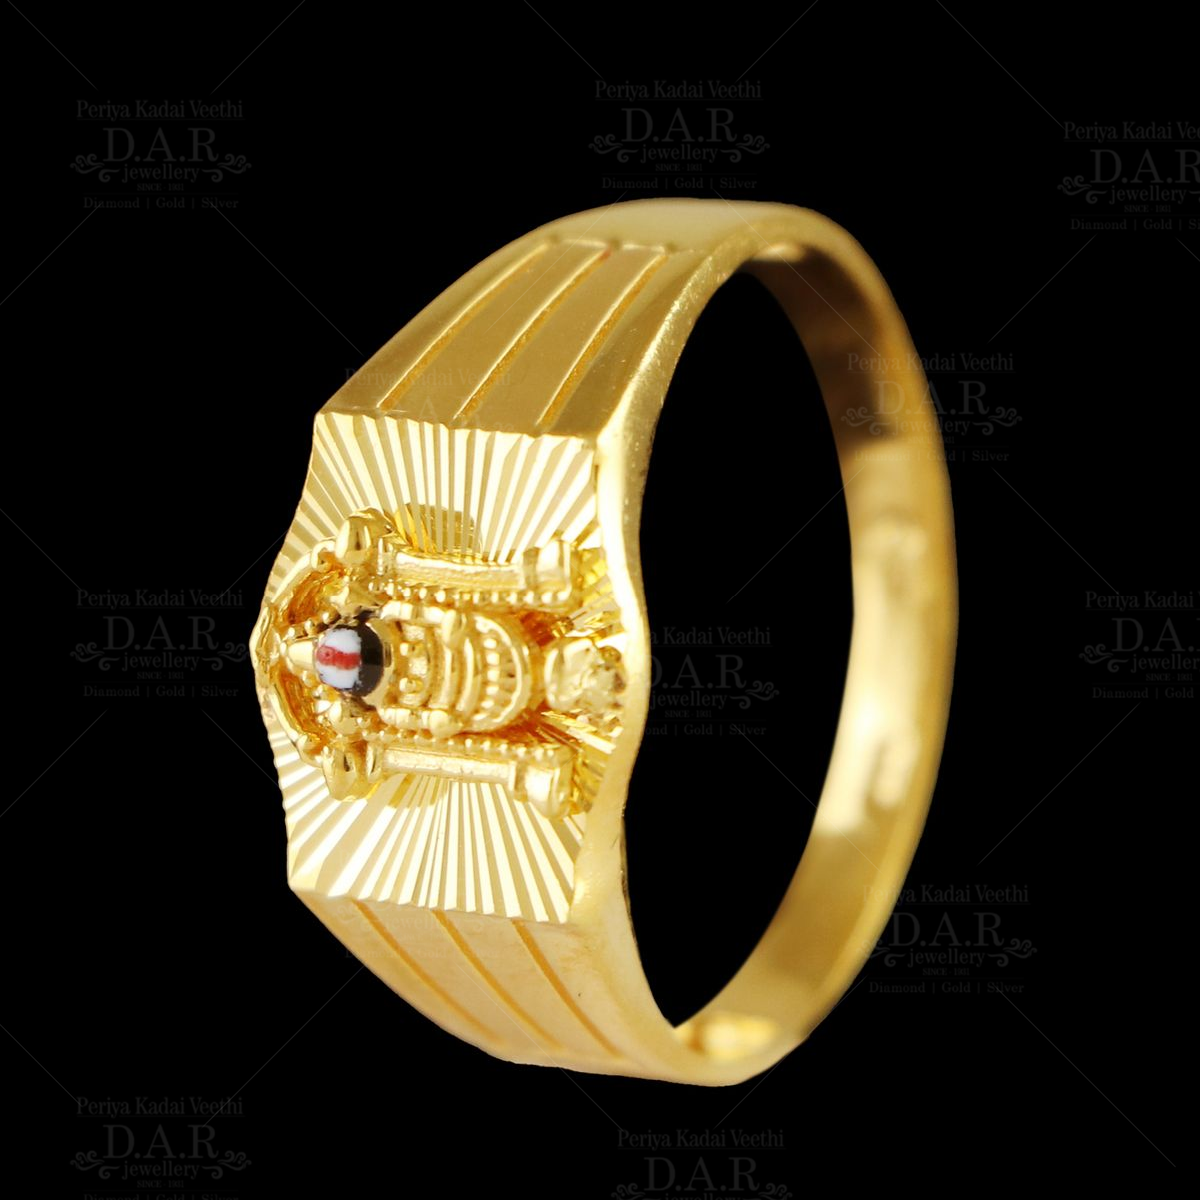 Buy 22K Gold Casting Lord Balaji Ring 93VC1671 Online from Vaibhav Jewellers